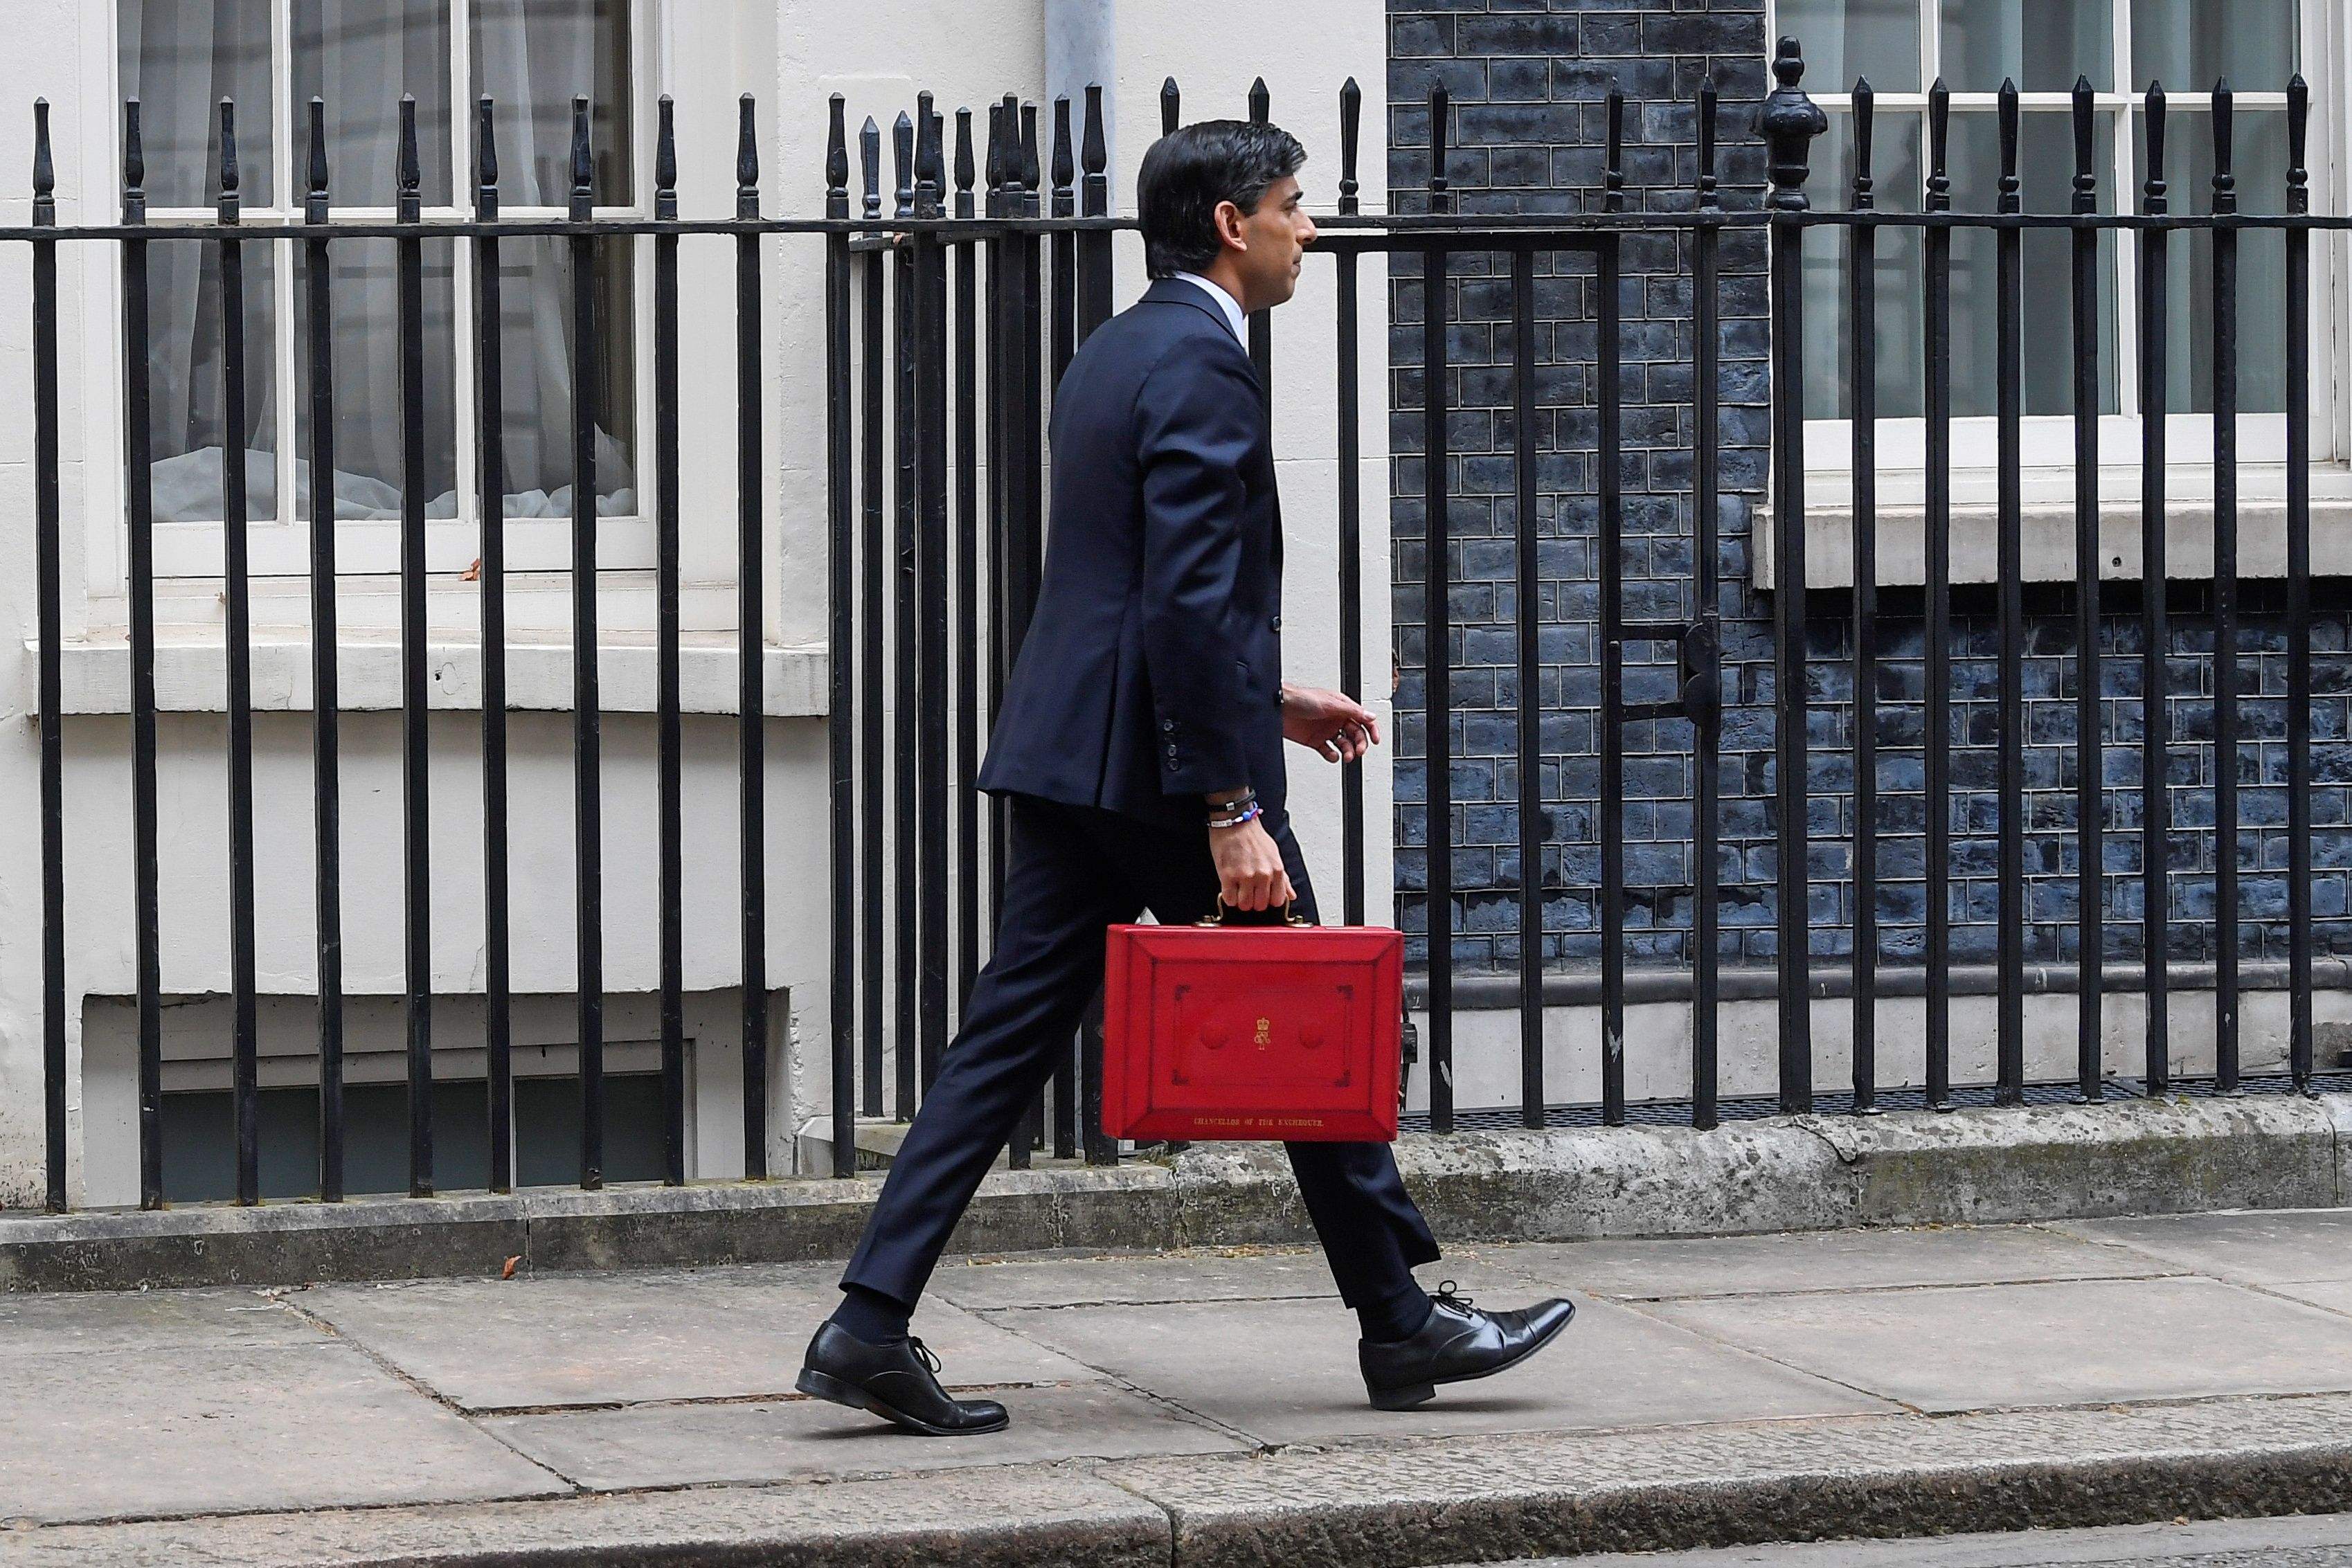 Britain's Chancellor of the Exchequer Sunak carries the the budget box in London